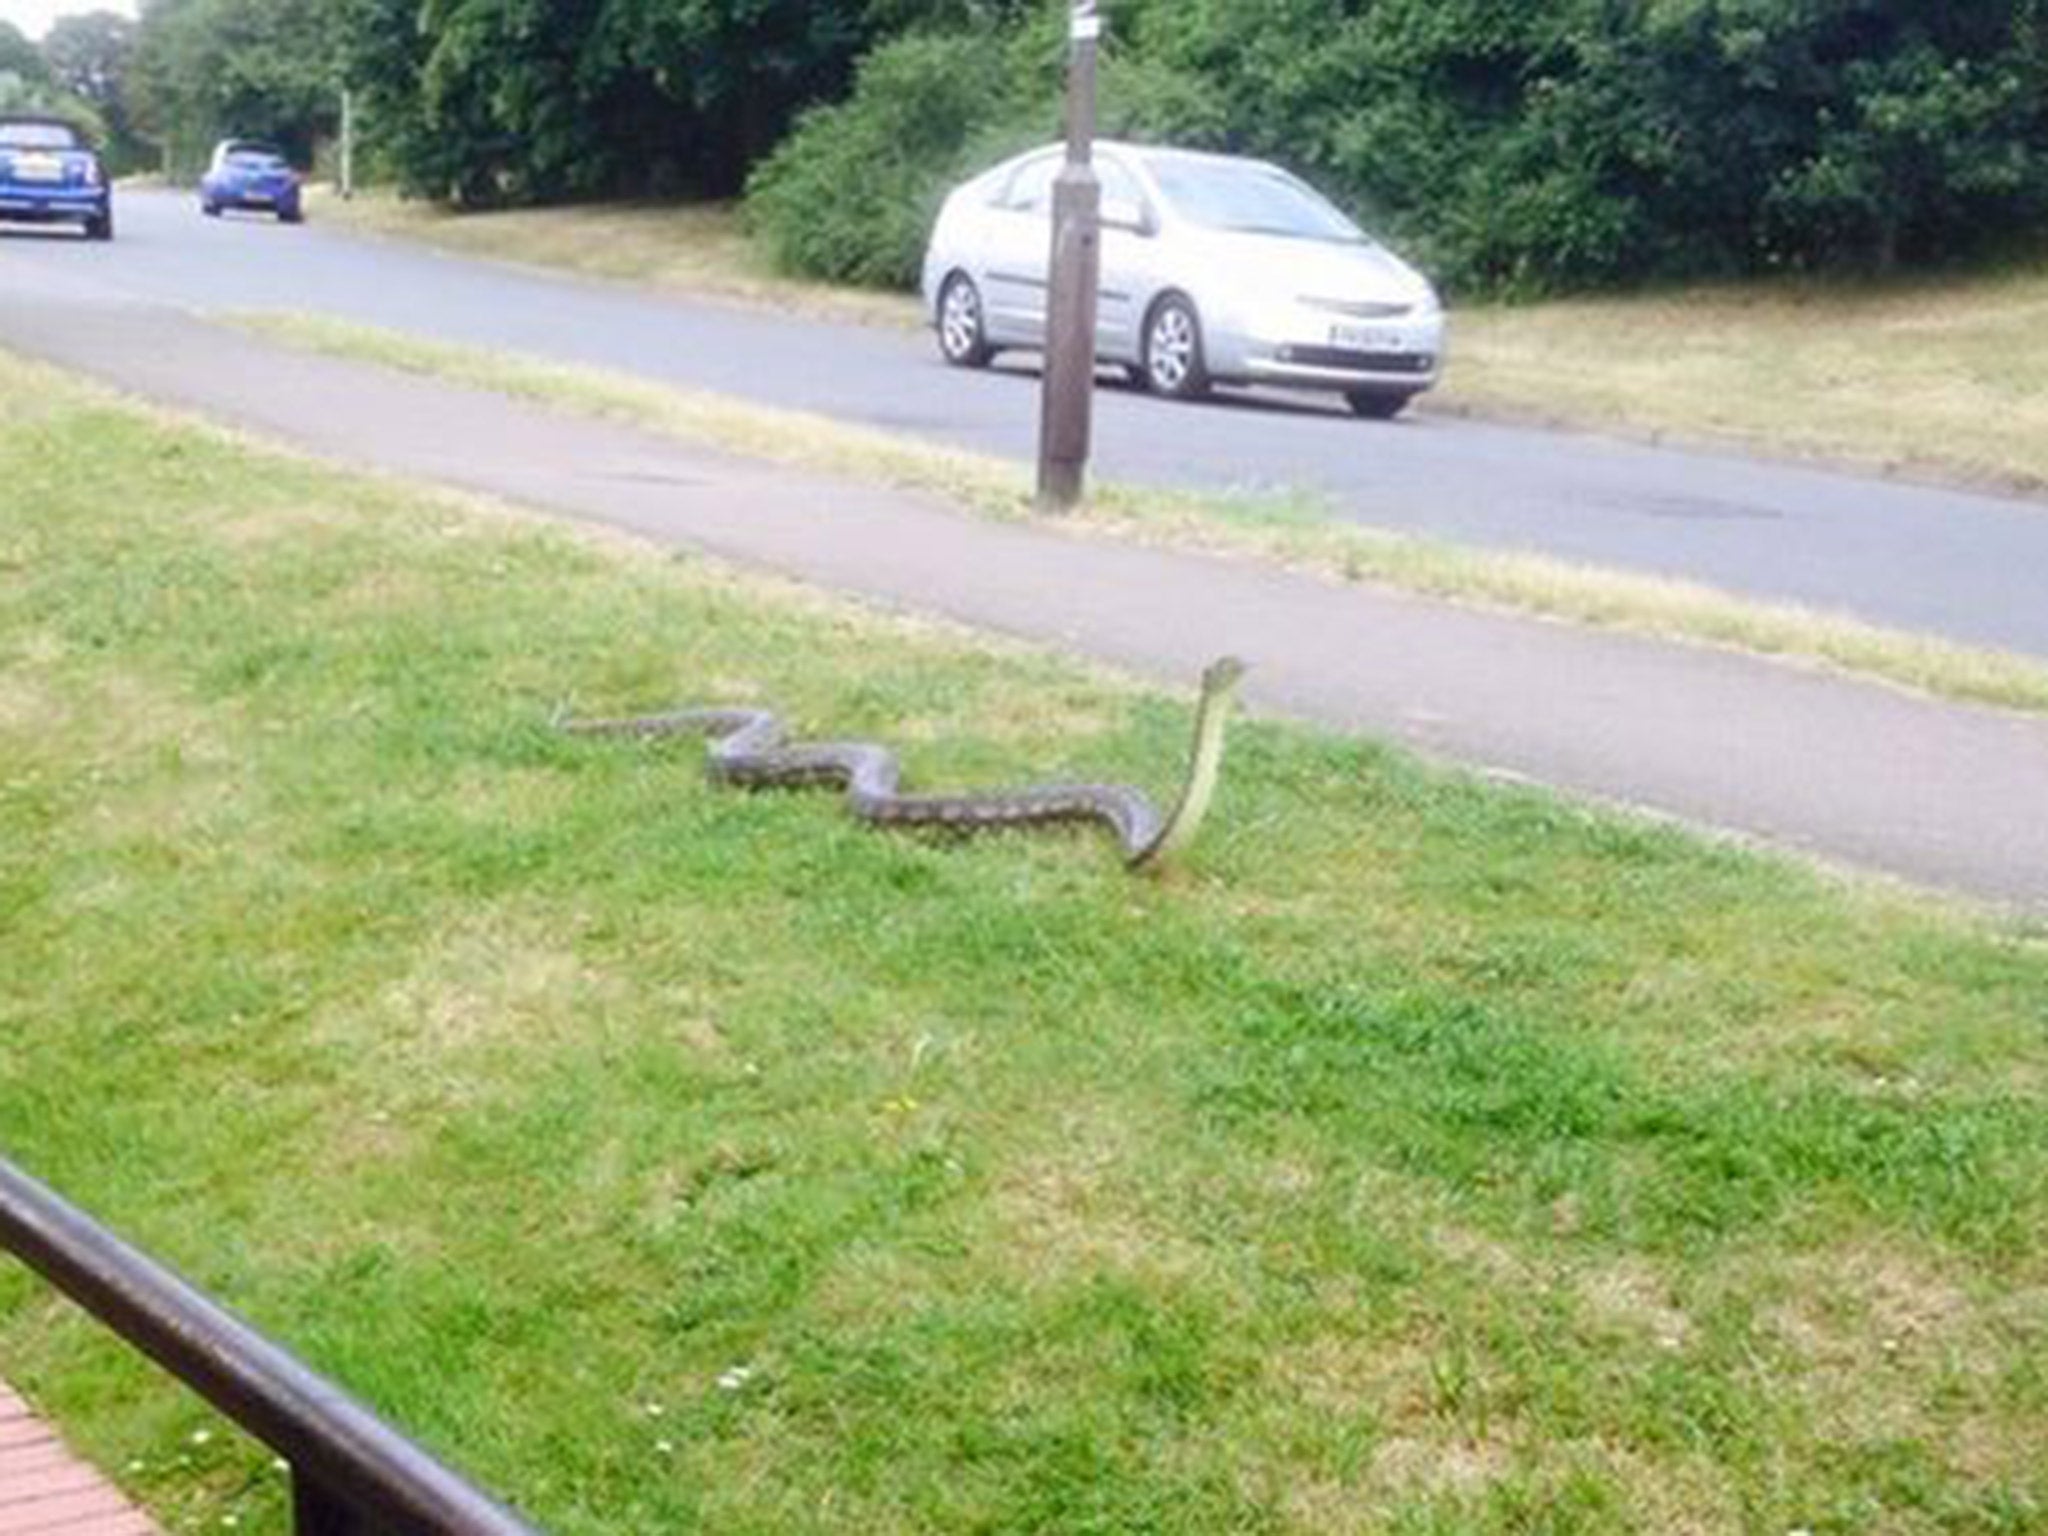 Sarah Bick posted the image of the snake on Facebook